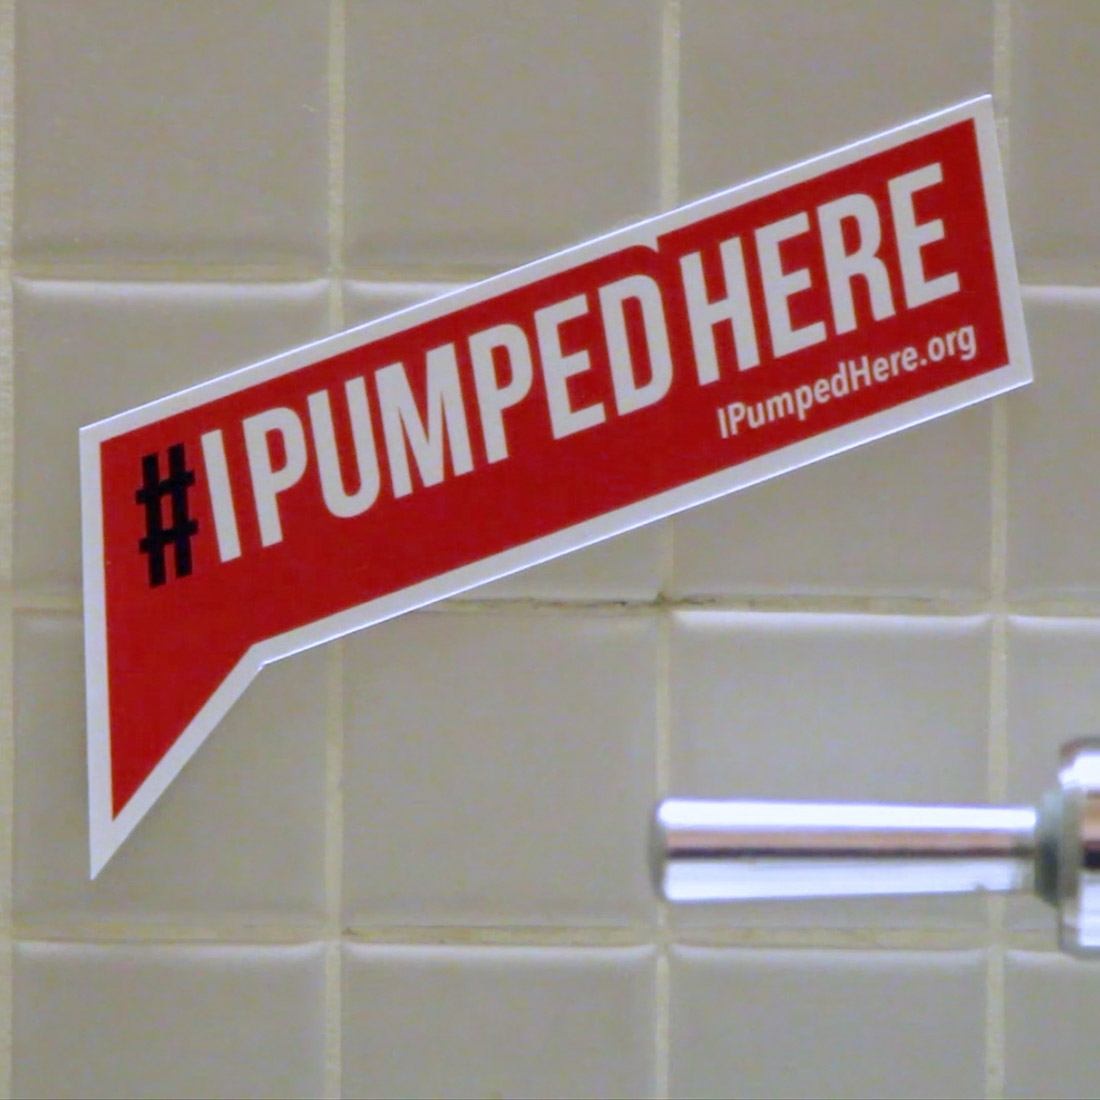 I Pumped Here sticker on bathroom stall